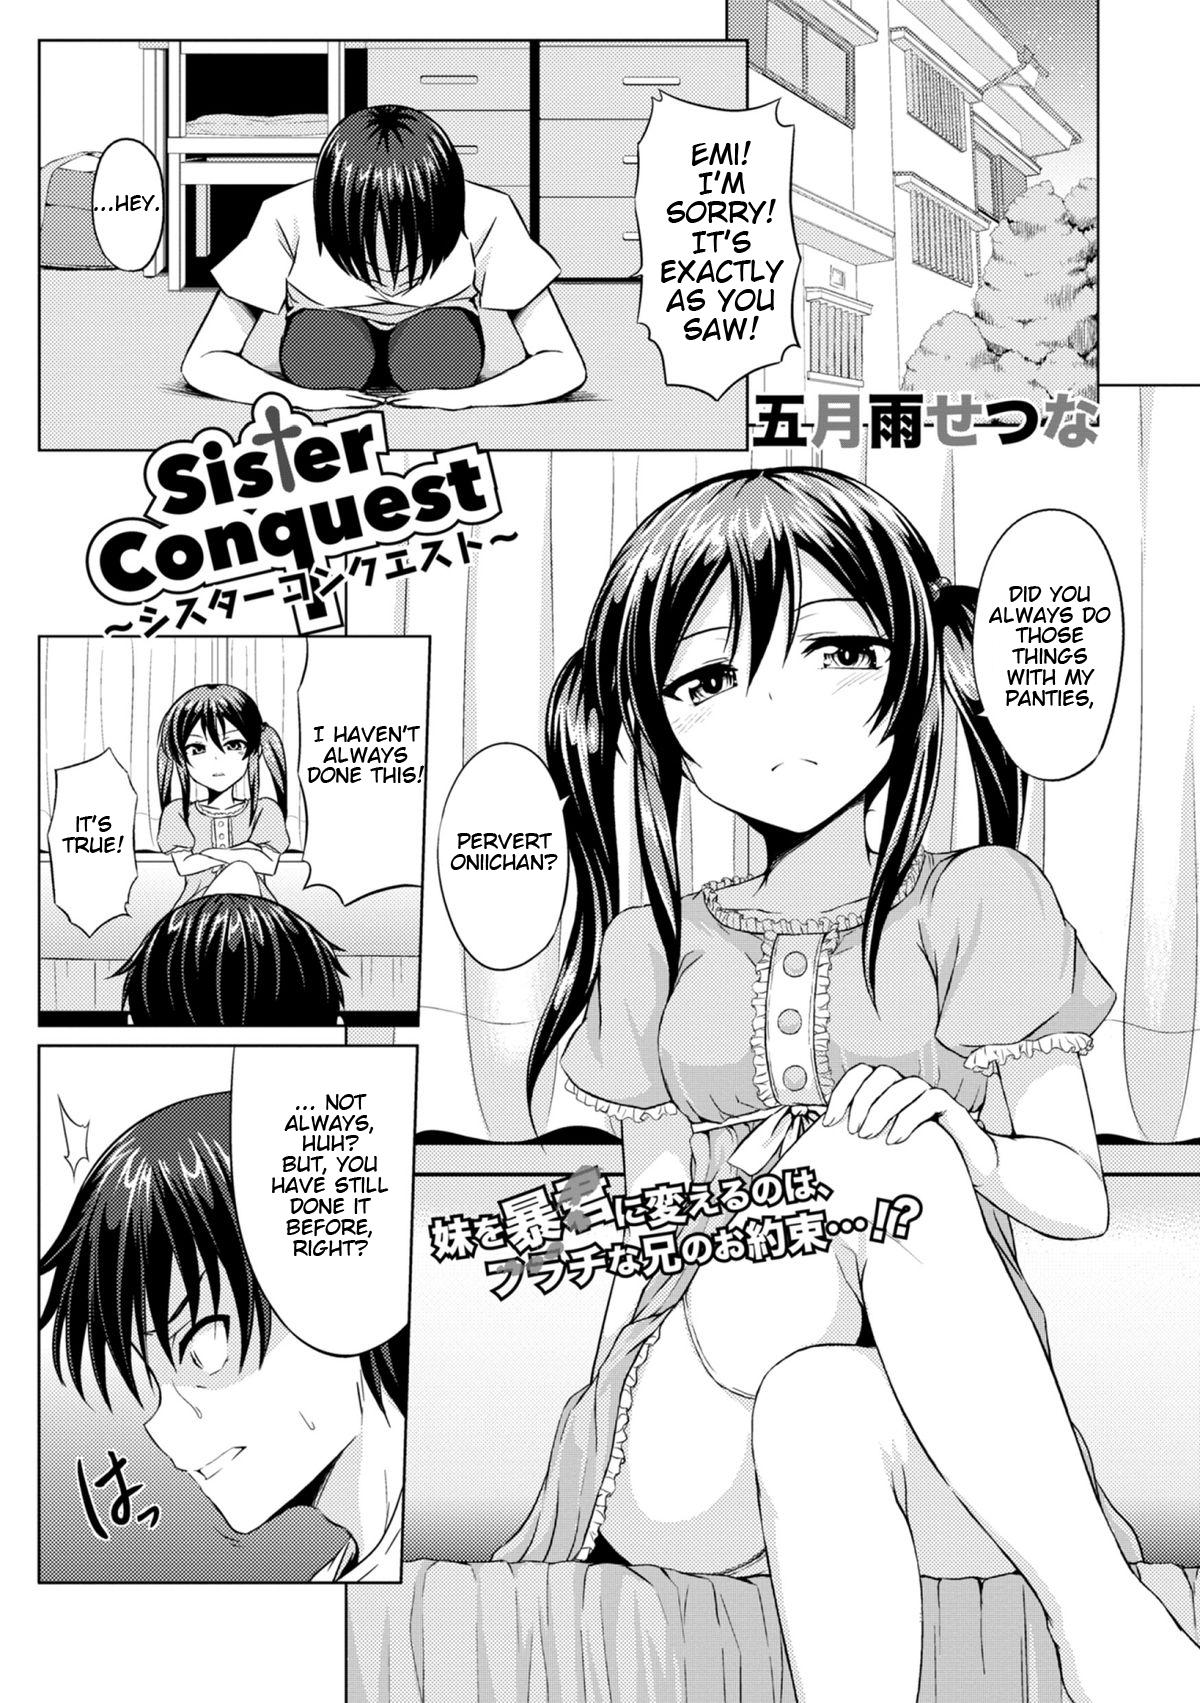 Fuck hentai sister How to